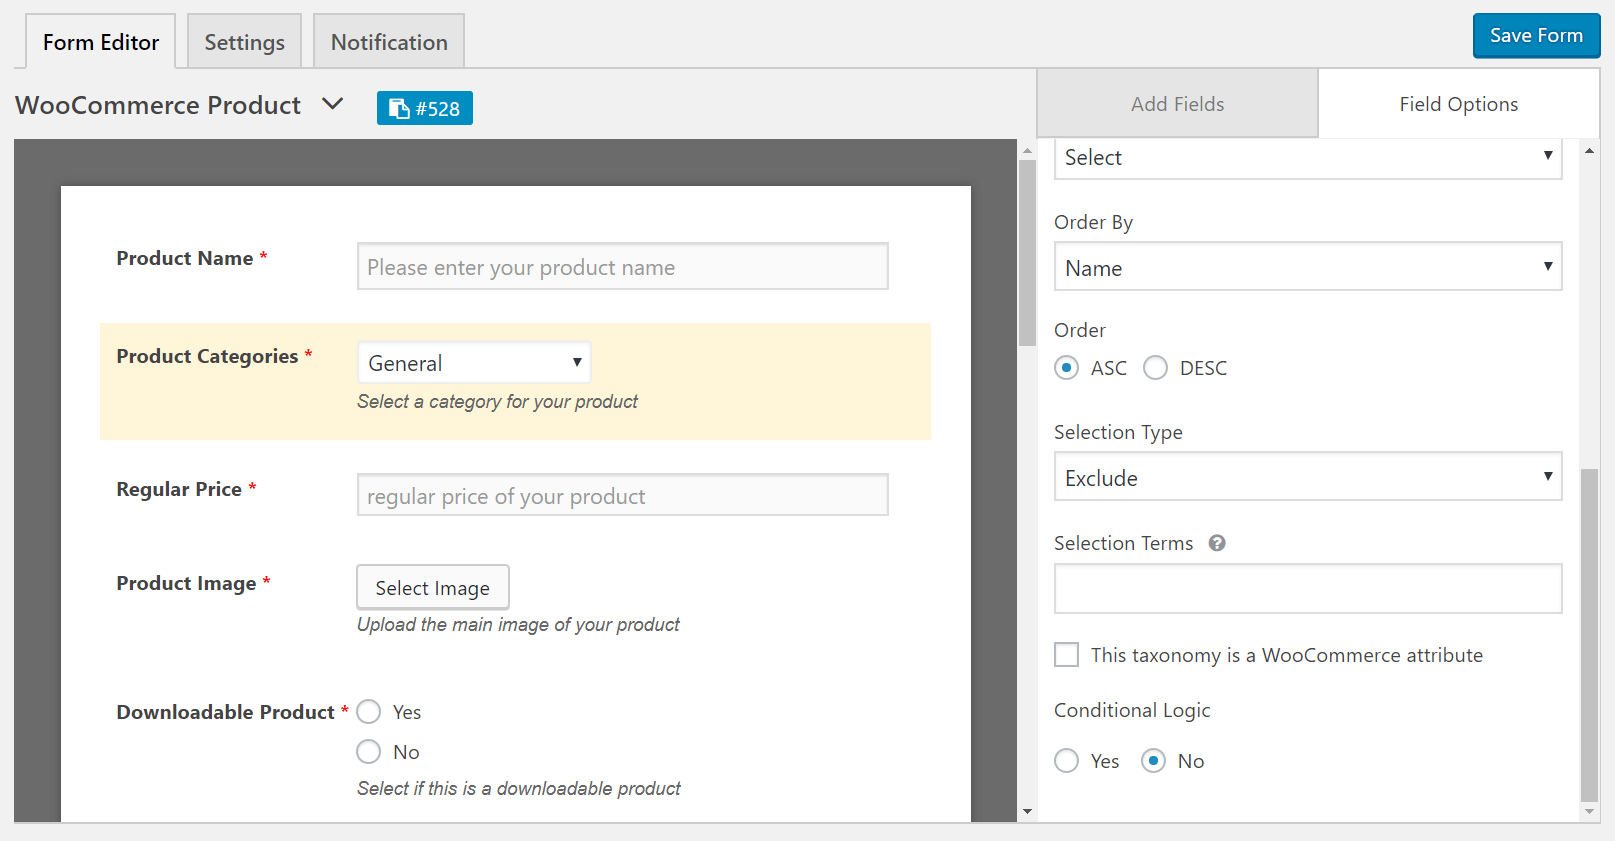 Provide WooCommerce Support